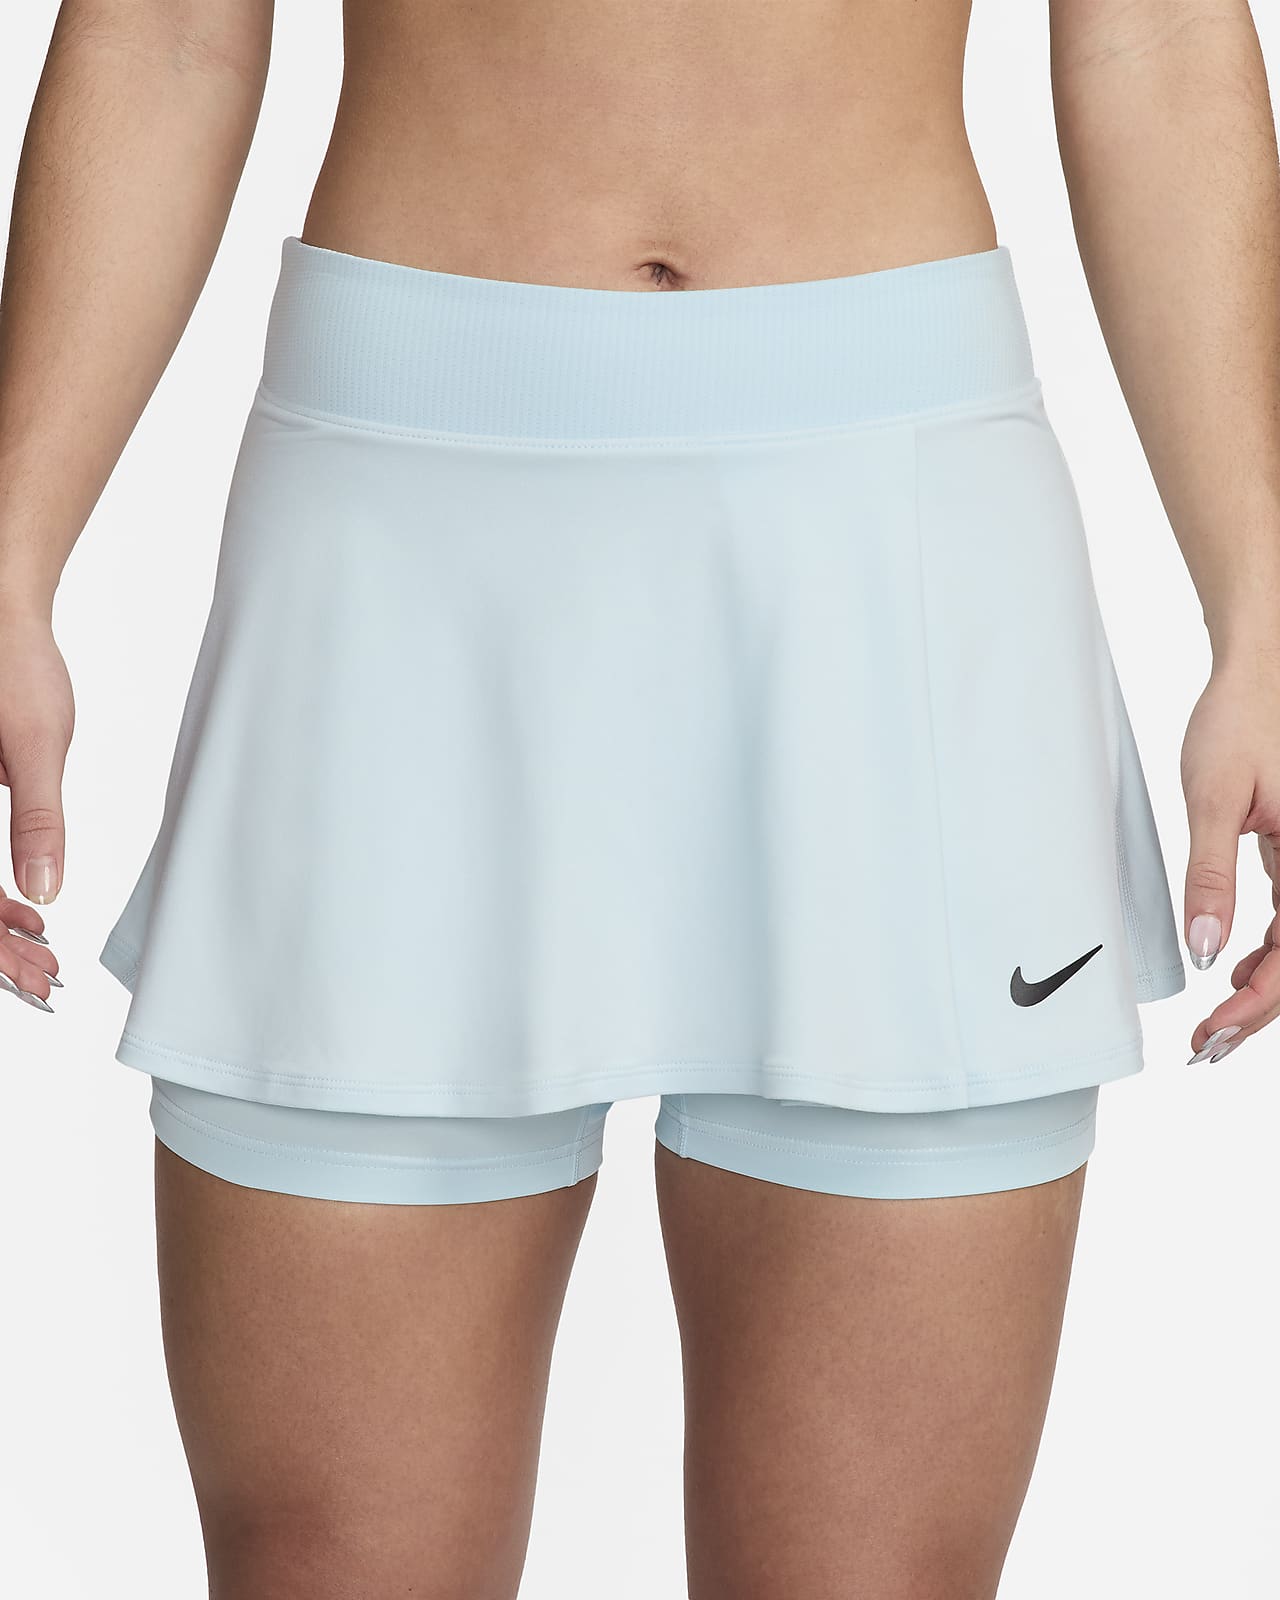 6 Reasons You Need A Quality Athletic Skort (plus style tips on